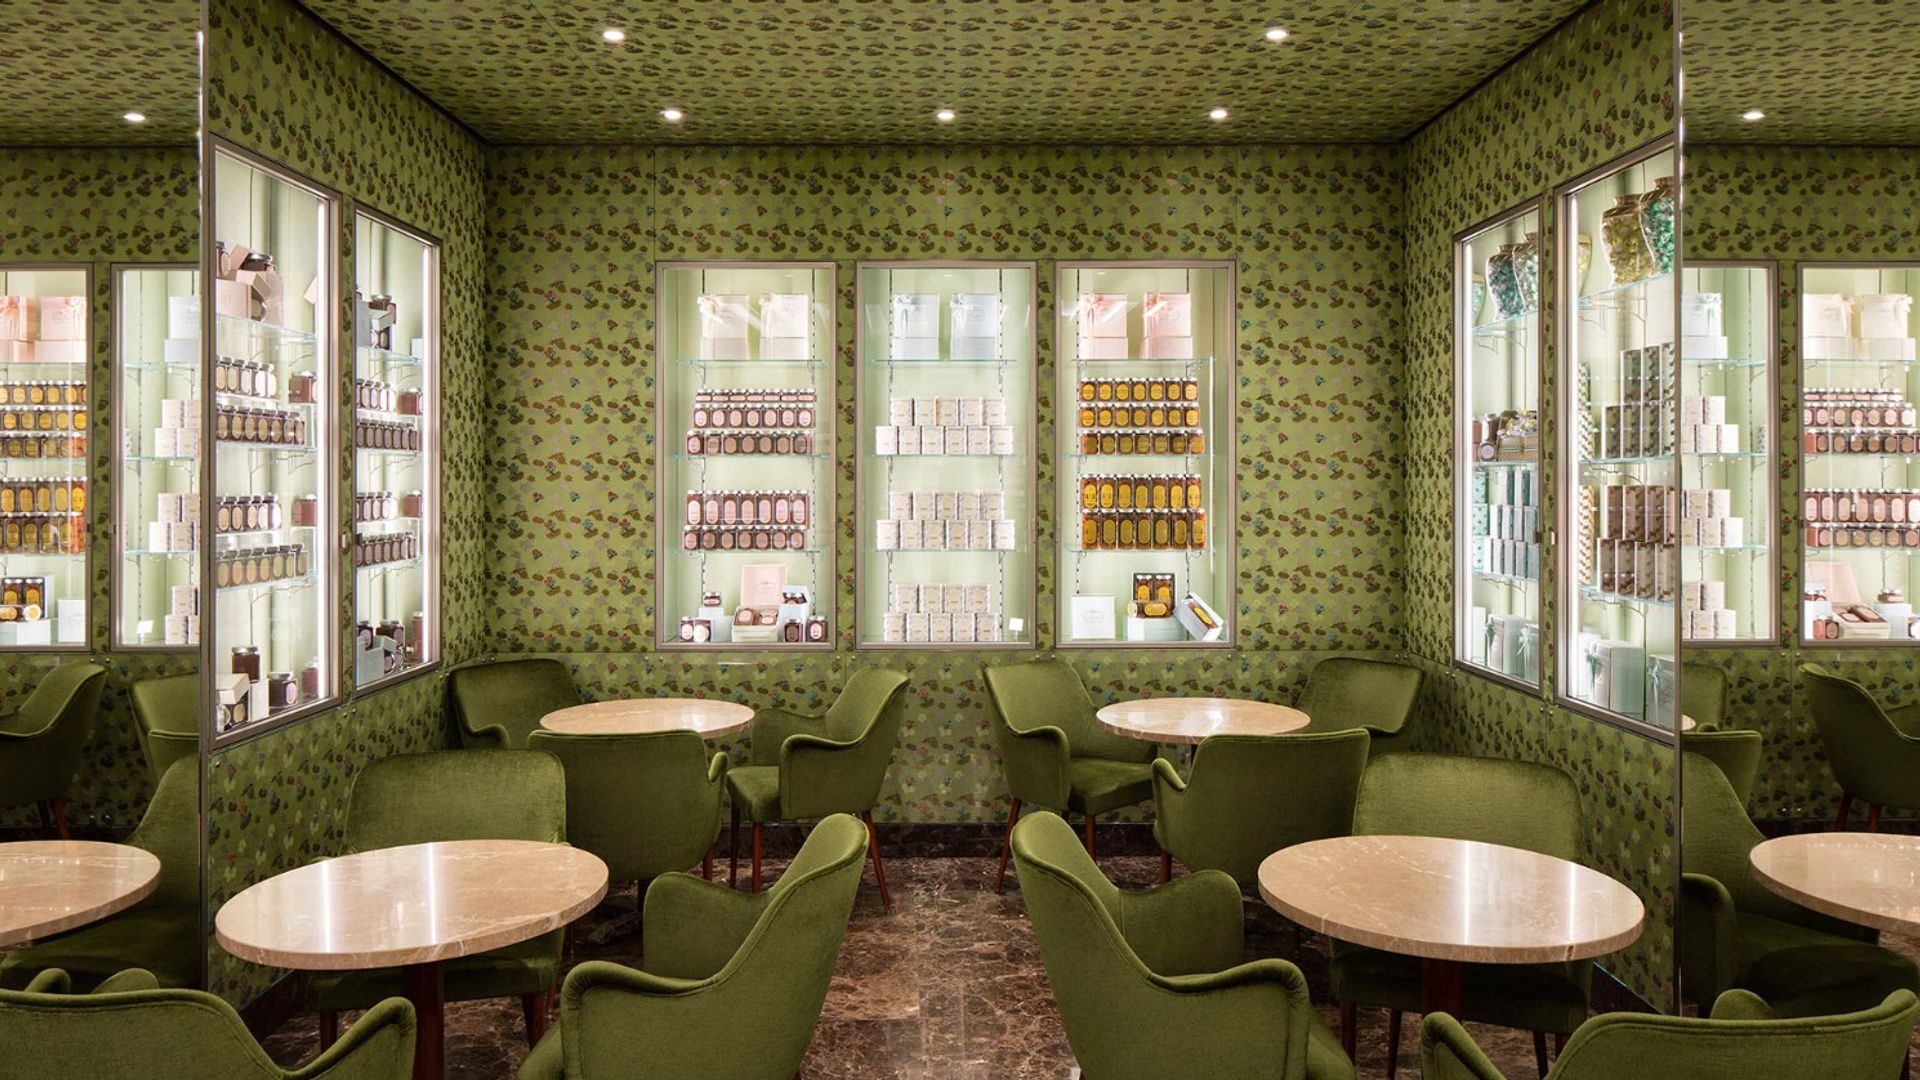 A Prada café is coming to Harrods: Here's everything you need to know |  HELLO!